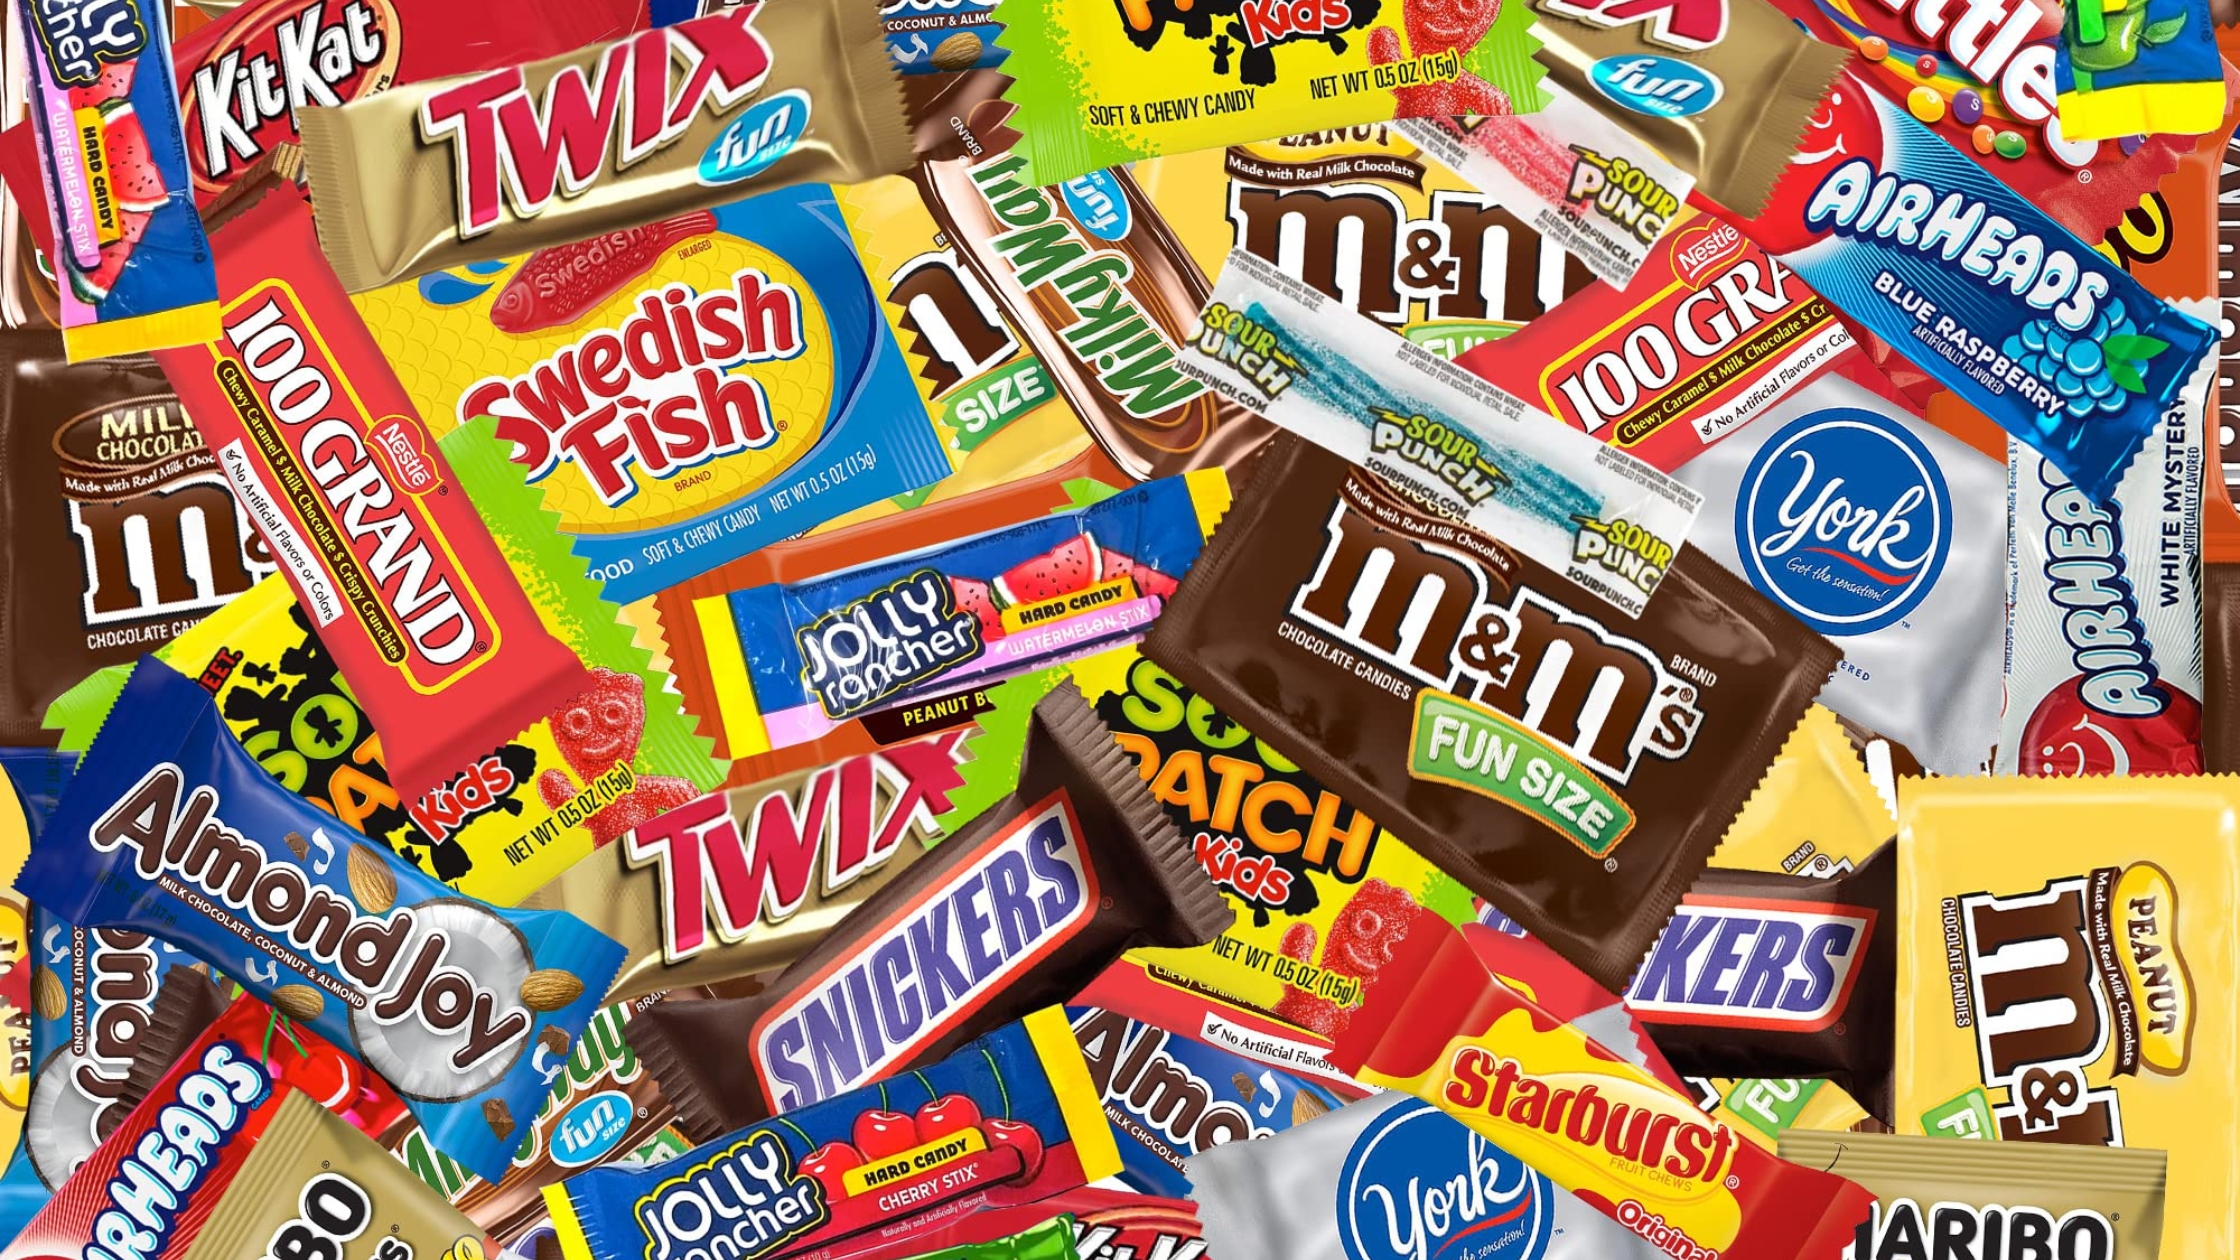 EXTRA LARGE Chocolate Bars - American Candy - KING SIZE Bulk Chocolate -  Assorted Chocolates Mix, All Your Favorite Chocolate Bars Including M&M,  Snickers, Twix and More, 20 Extra Large Bars… 